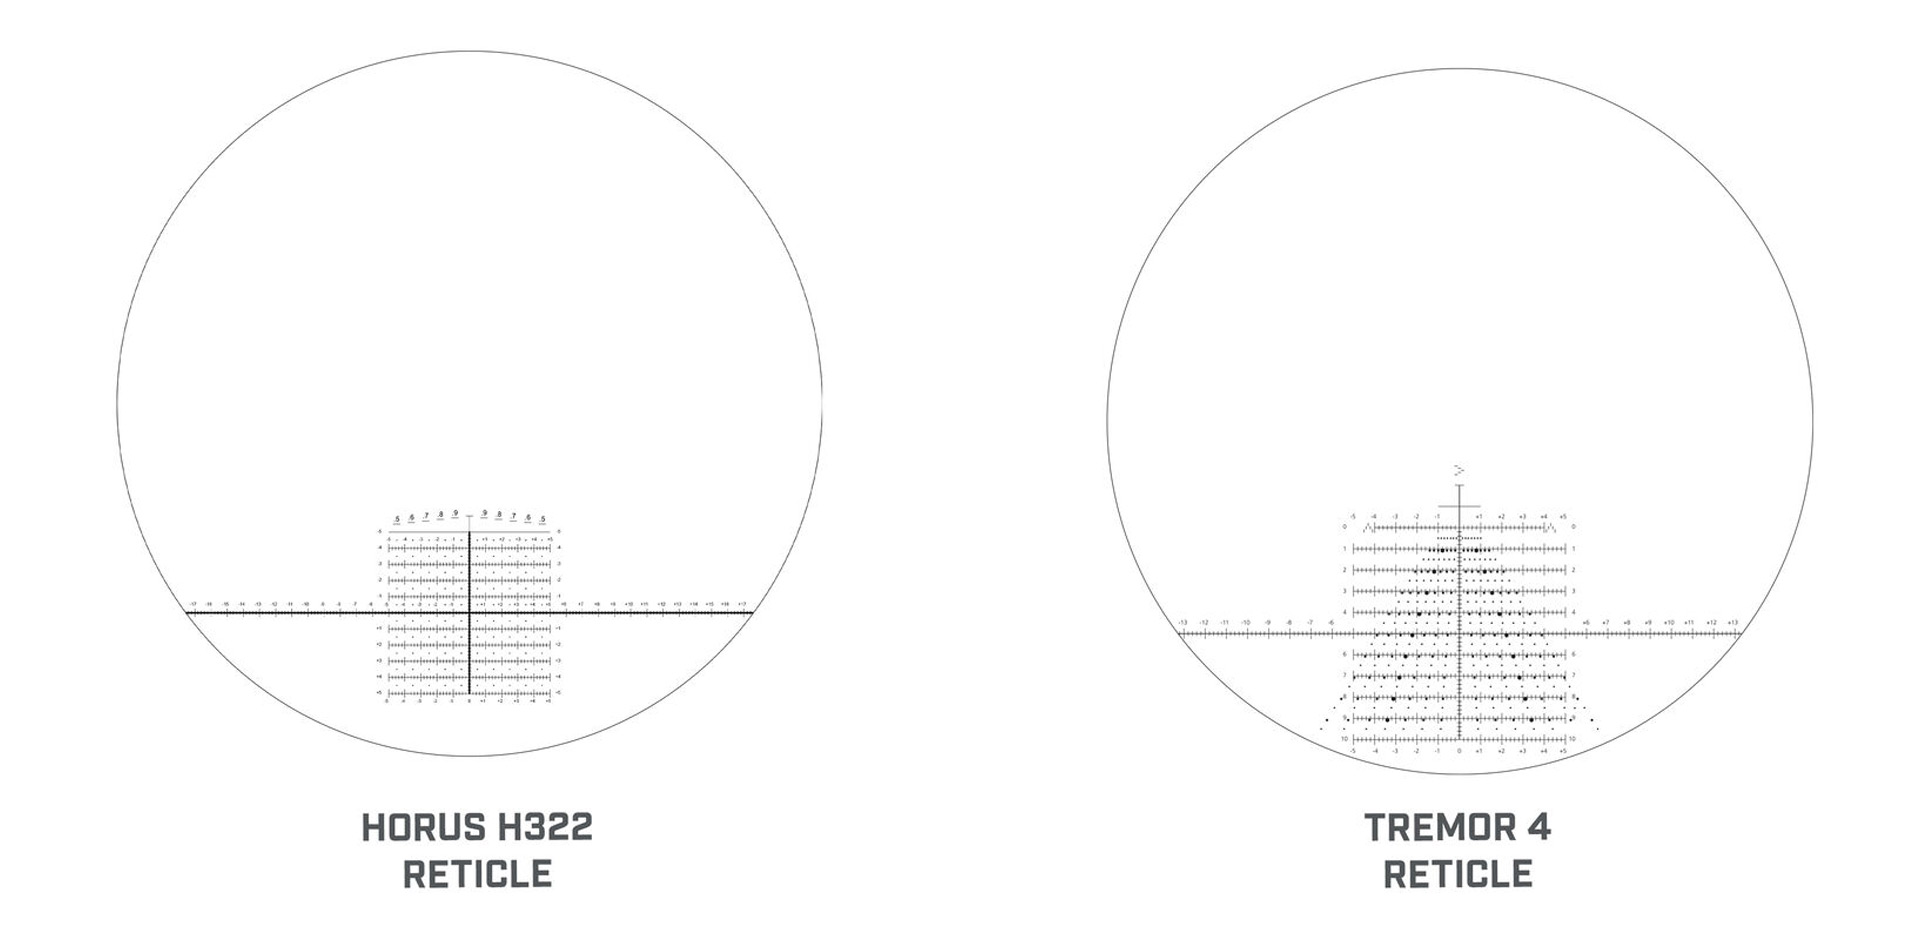 Horus H322 and TREMOR4 reticle options.